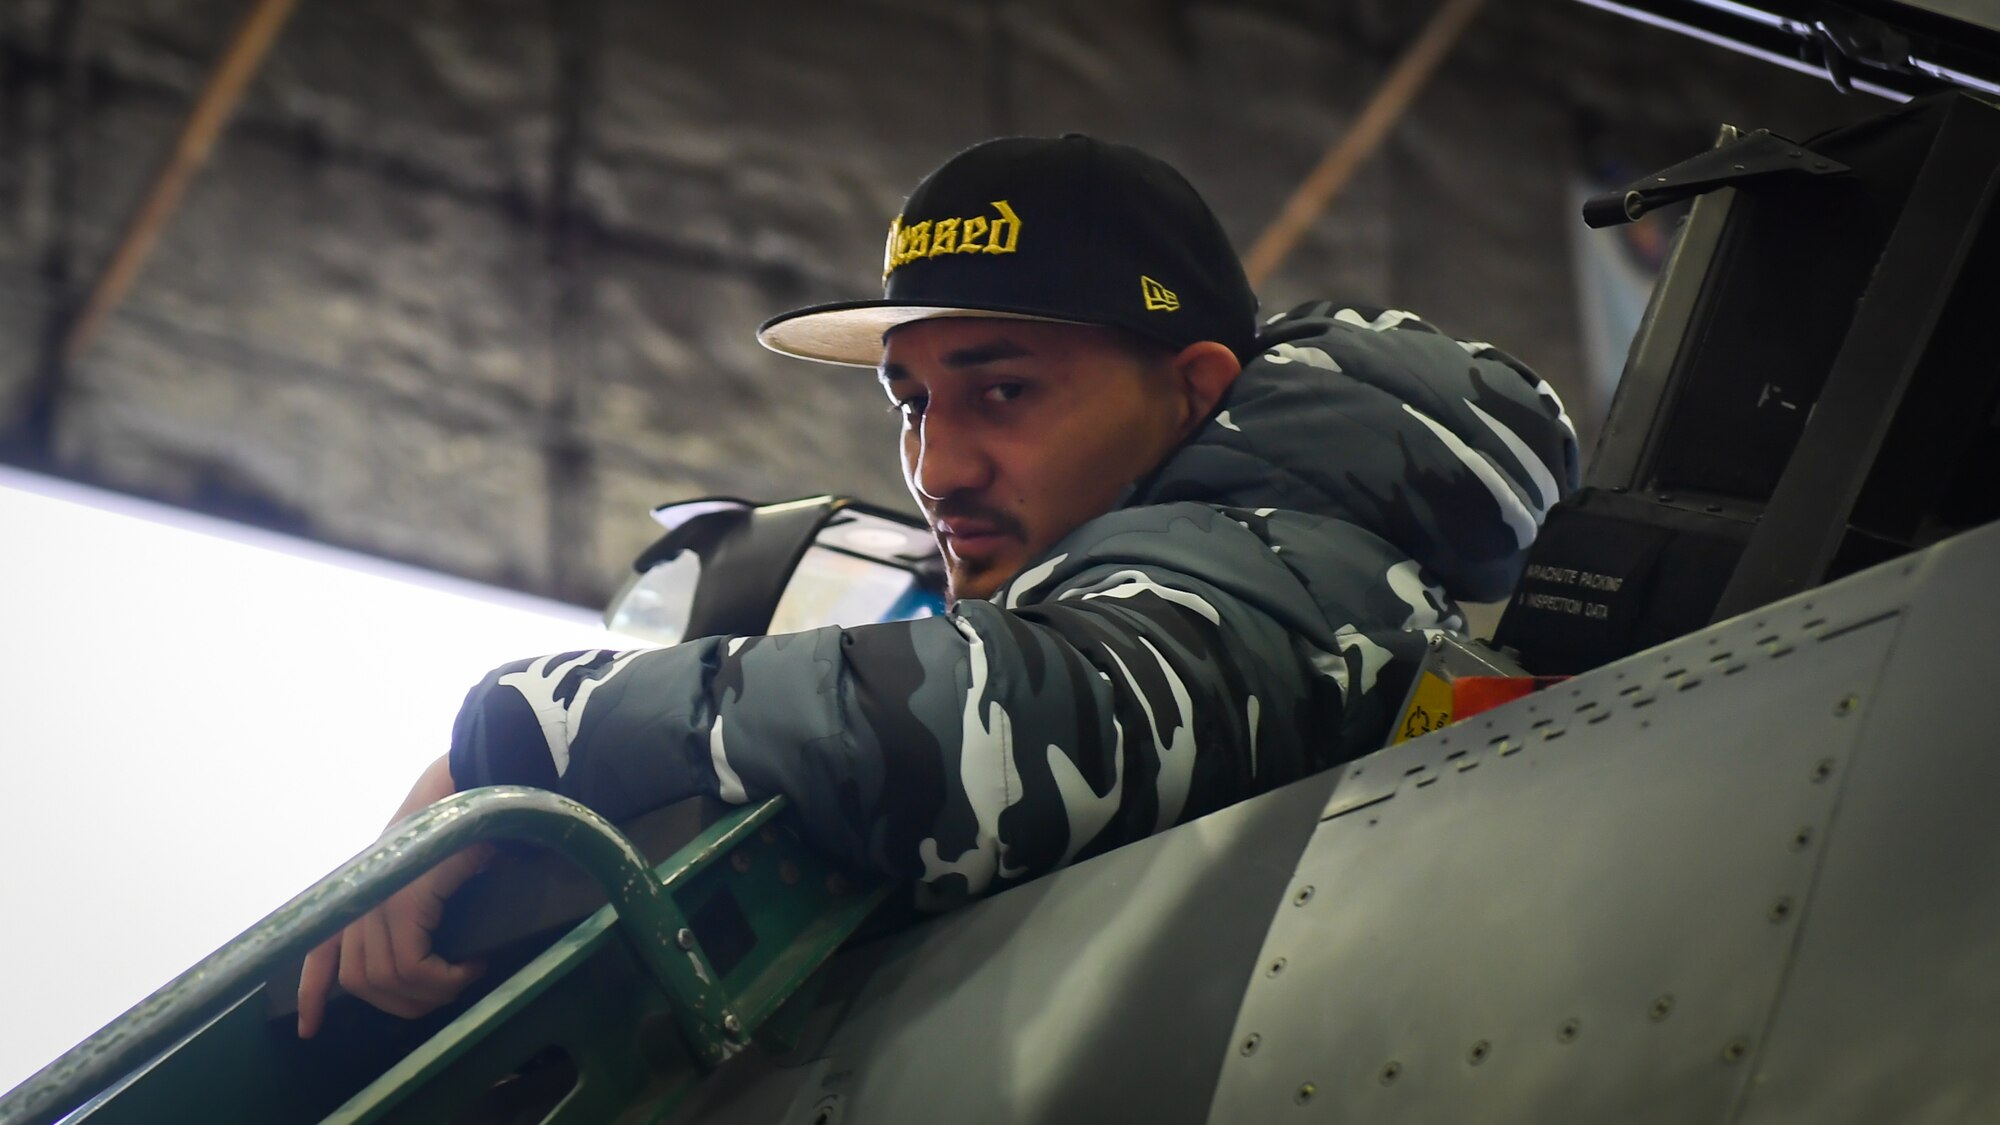 Max Holloway, Ultimate Fighting Championship featherweight champion, looks out of the cockpit of an F-16 Fighting Falcon during a USO tour at Osan Air Base, Republic of Korea, April 23, 2018.